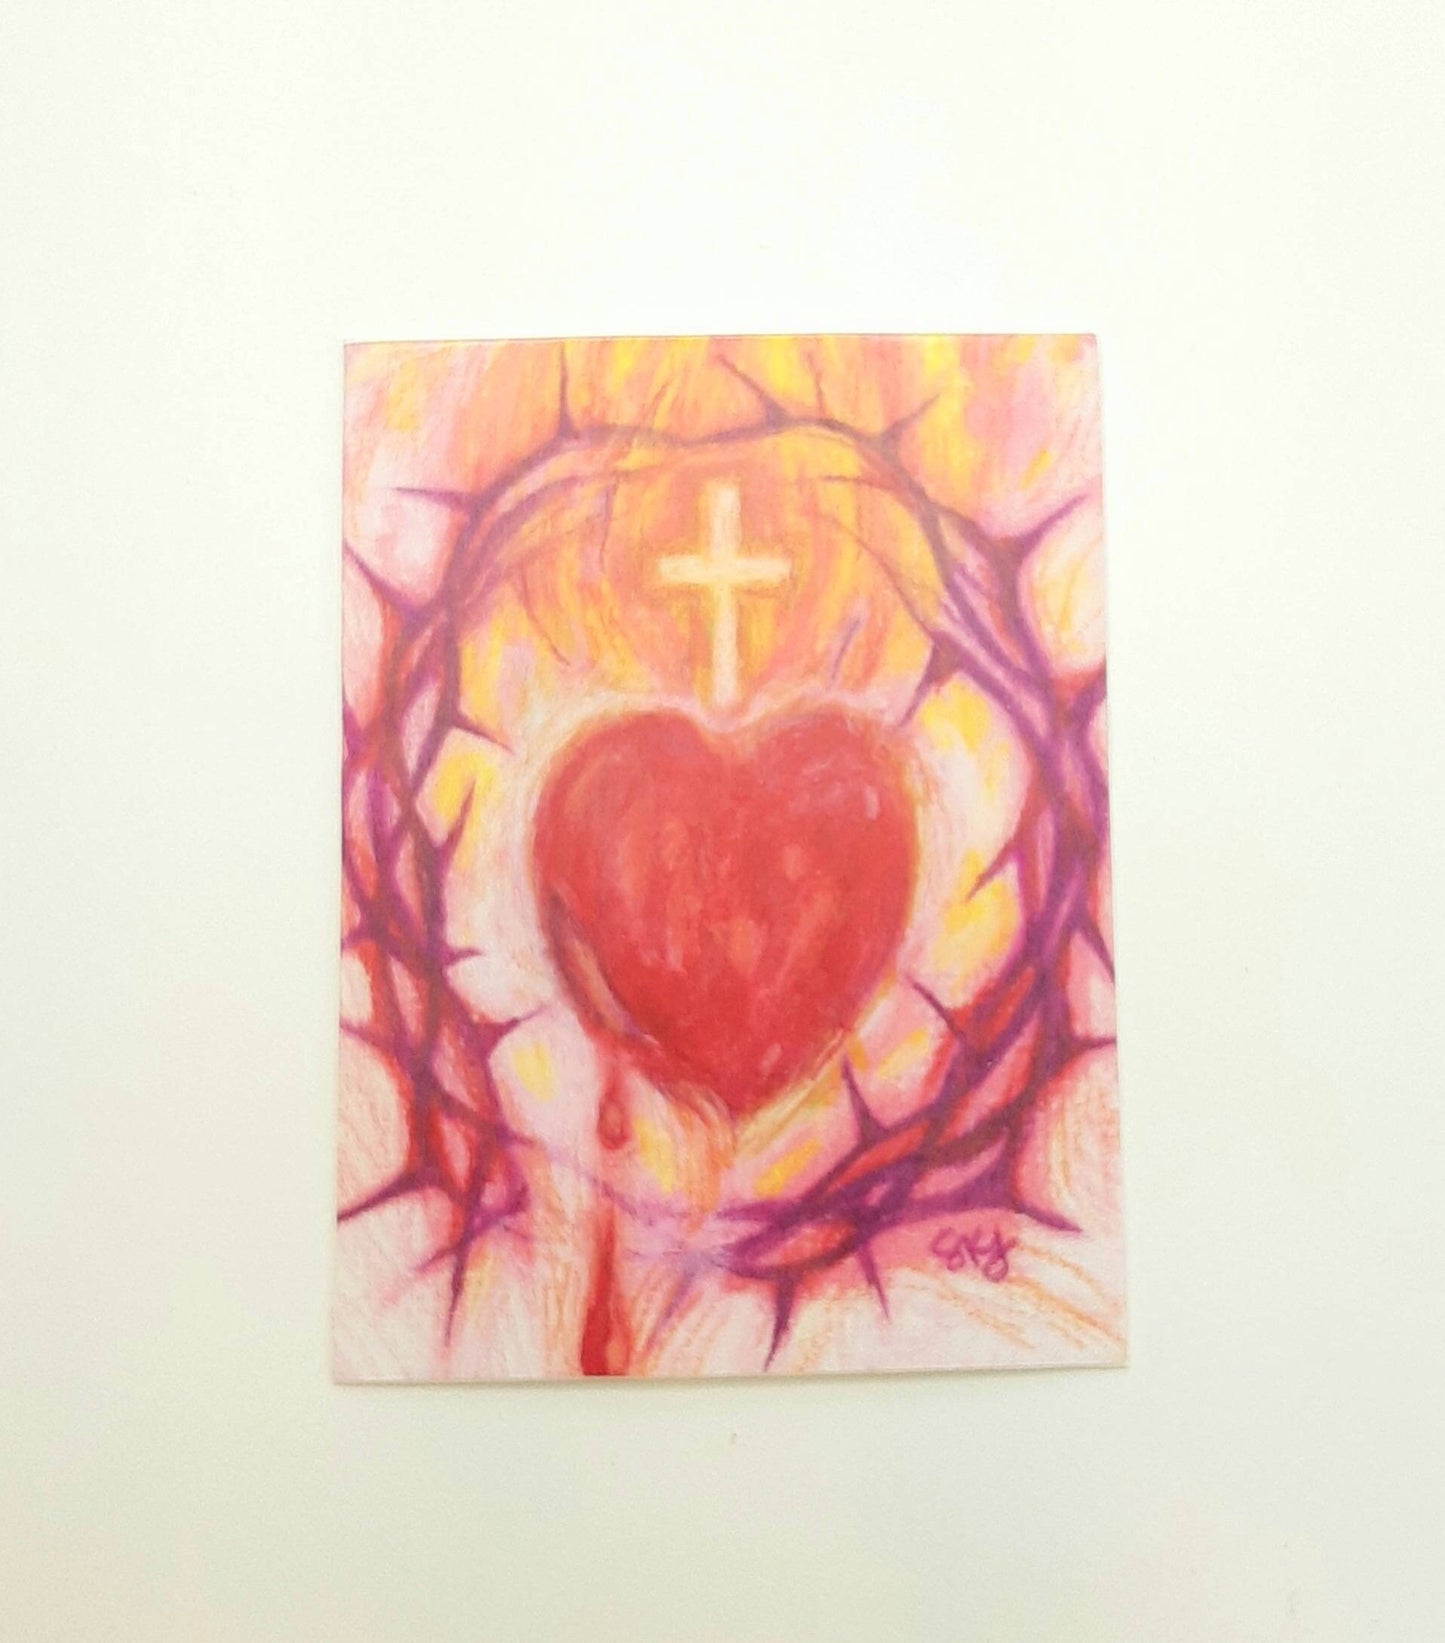 Sacred Heart of Jesus Sticker – High Quality Vinyl – Wash over and over